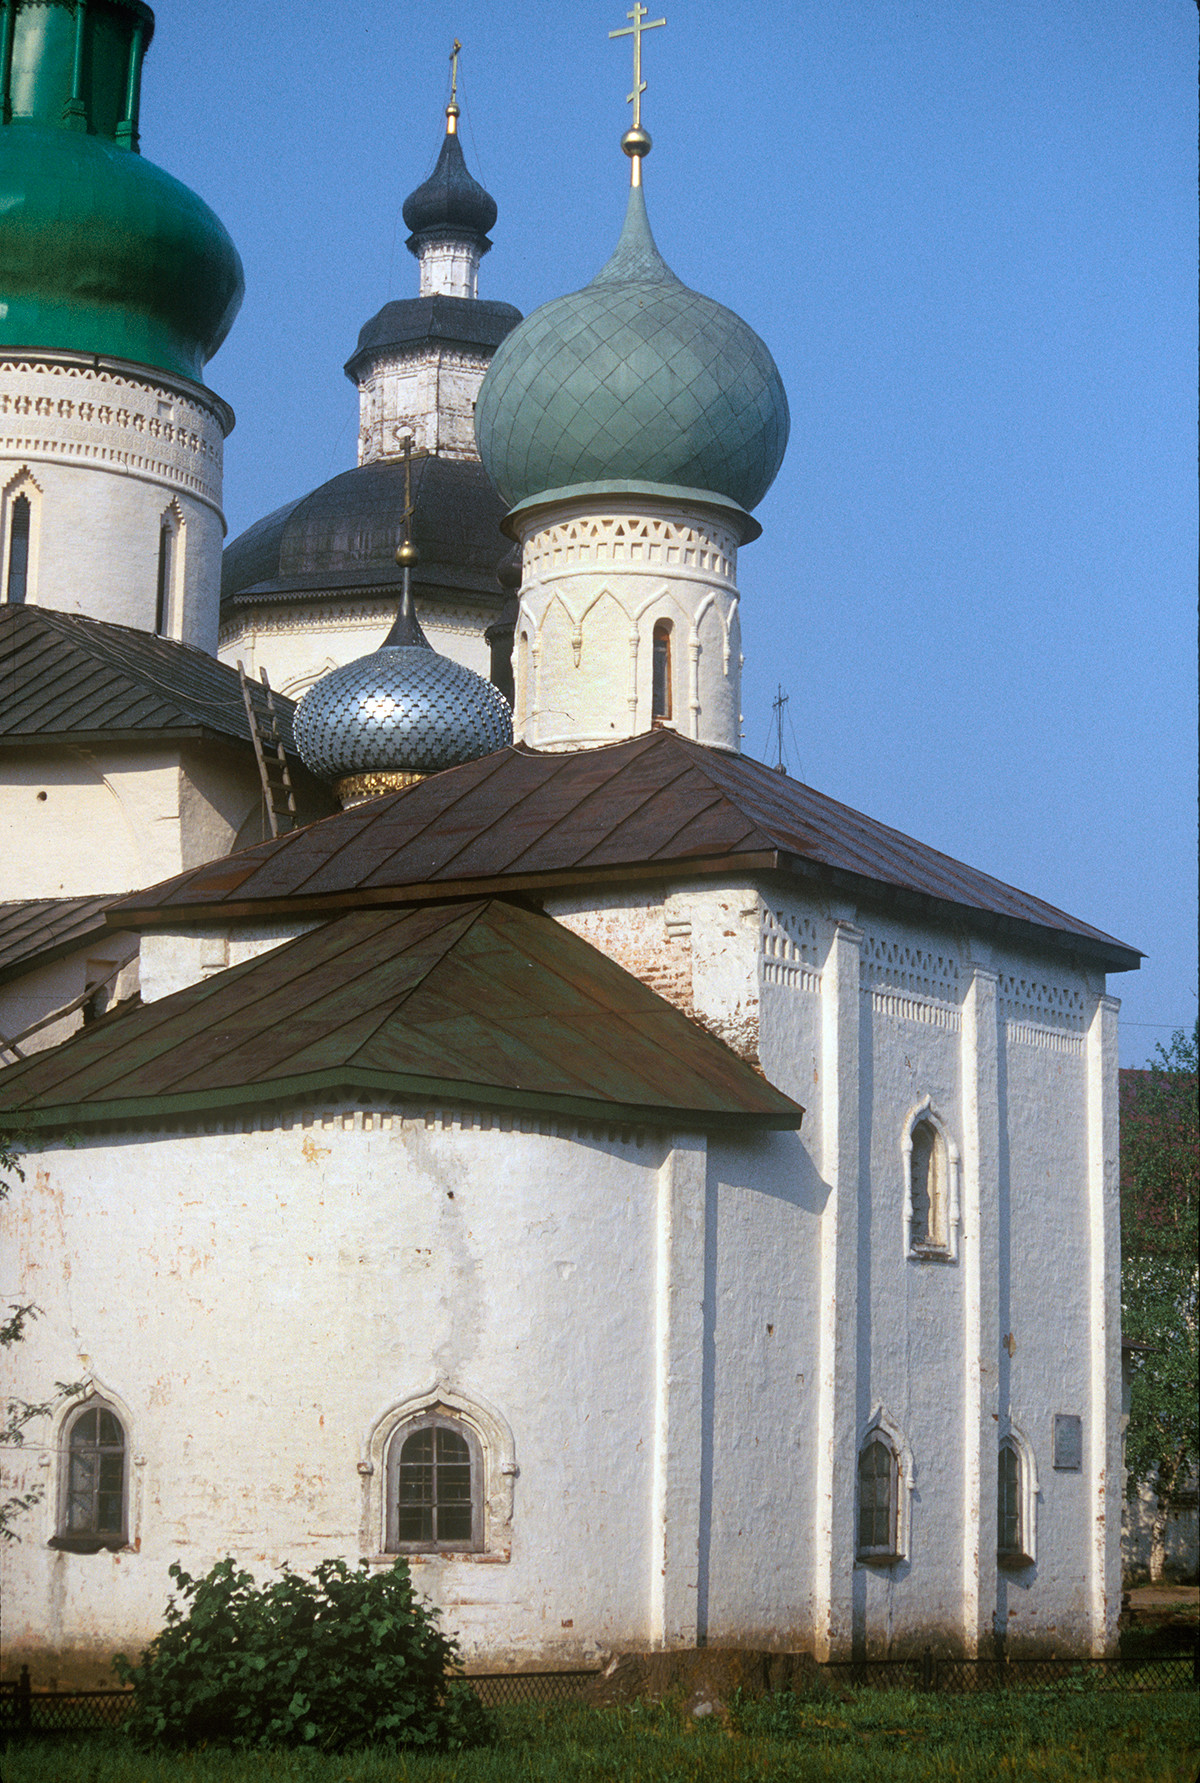 Church of St. Epiphanius, northeast view. July 15, 1999